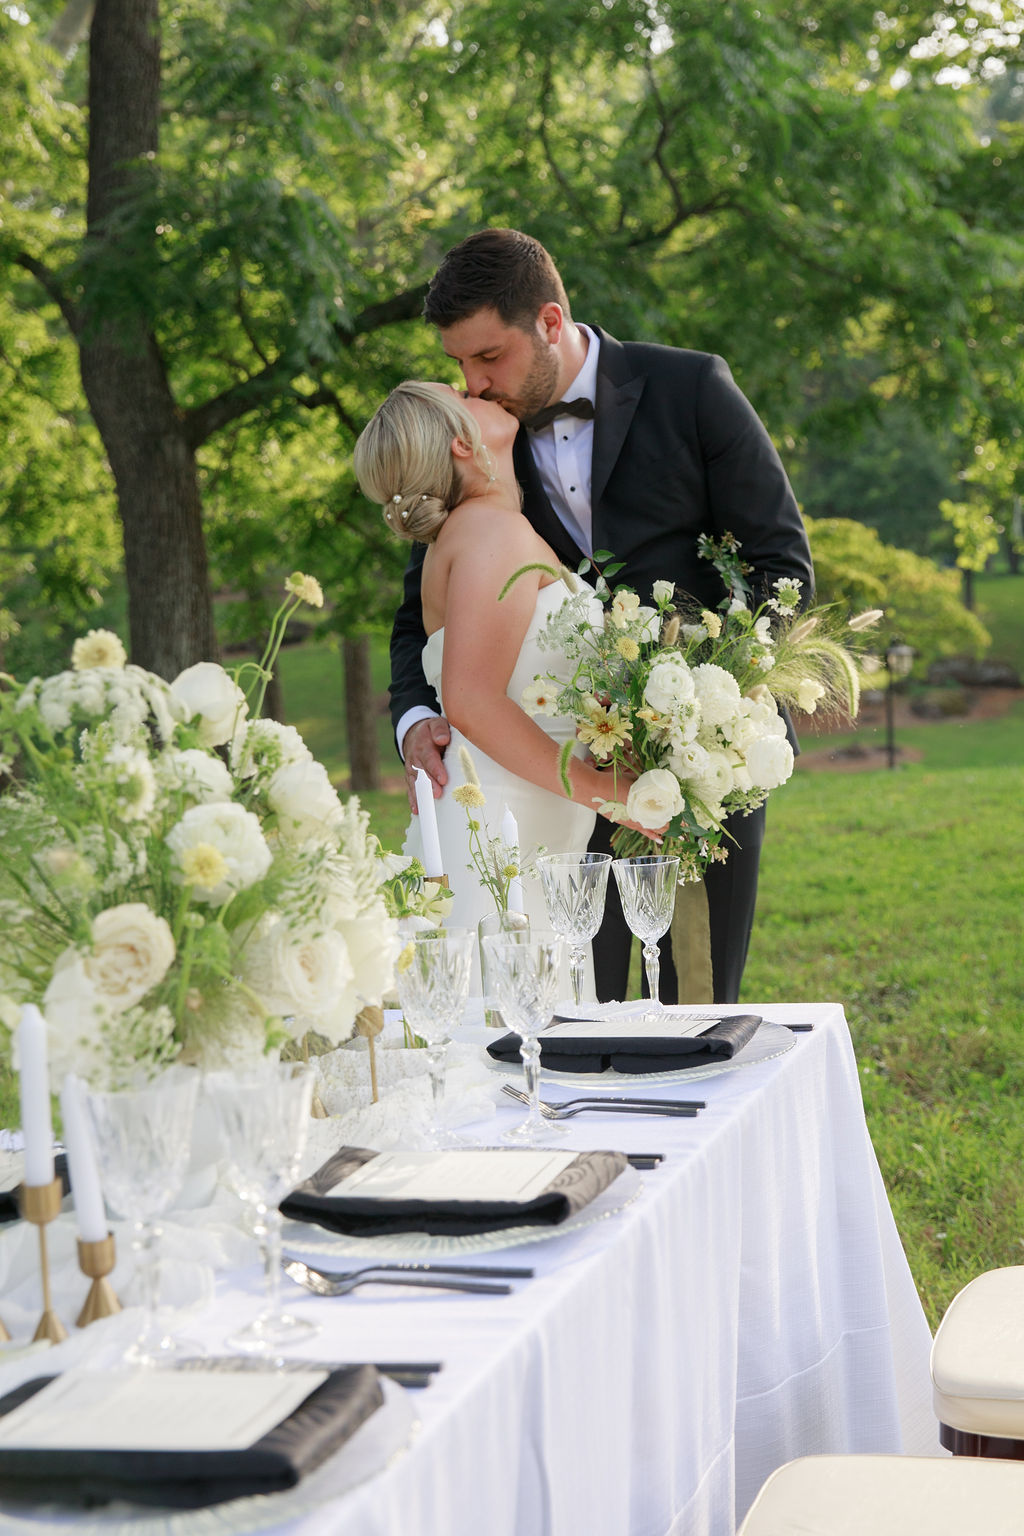 Newlyweds kiss next to their small outdoor reception table with white flower bouquets washington dc wedding florist